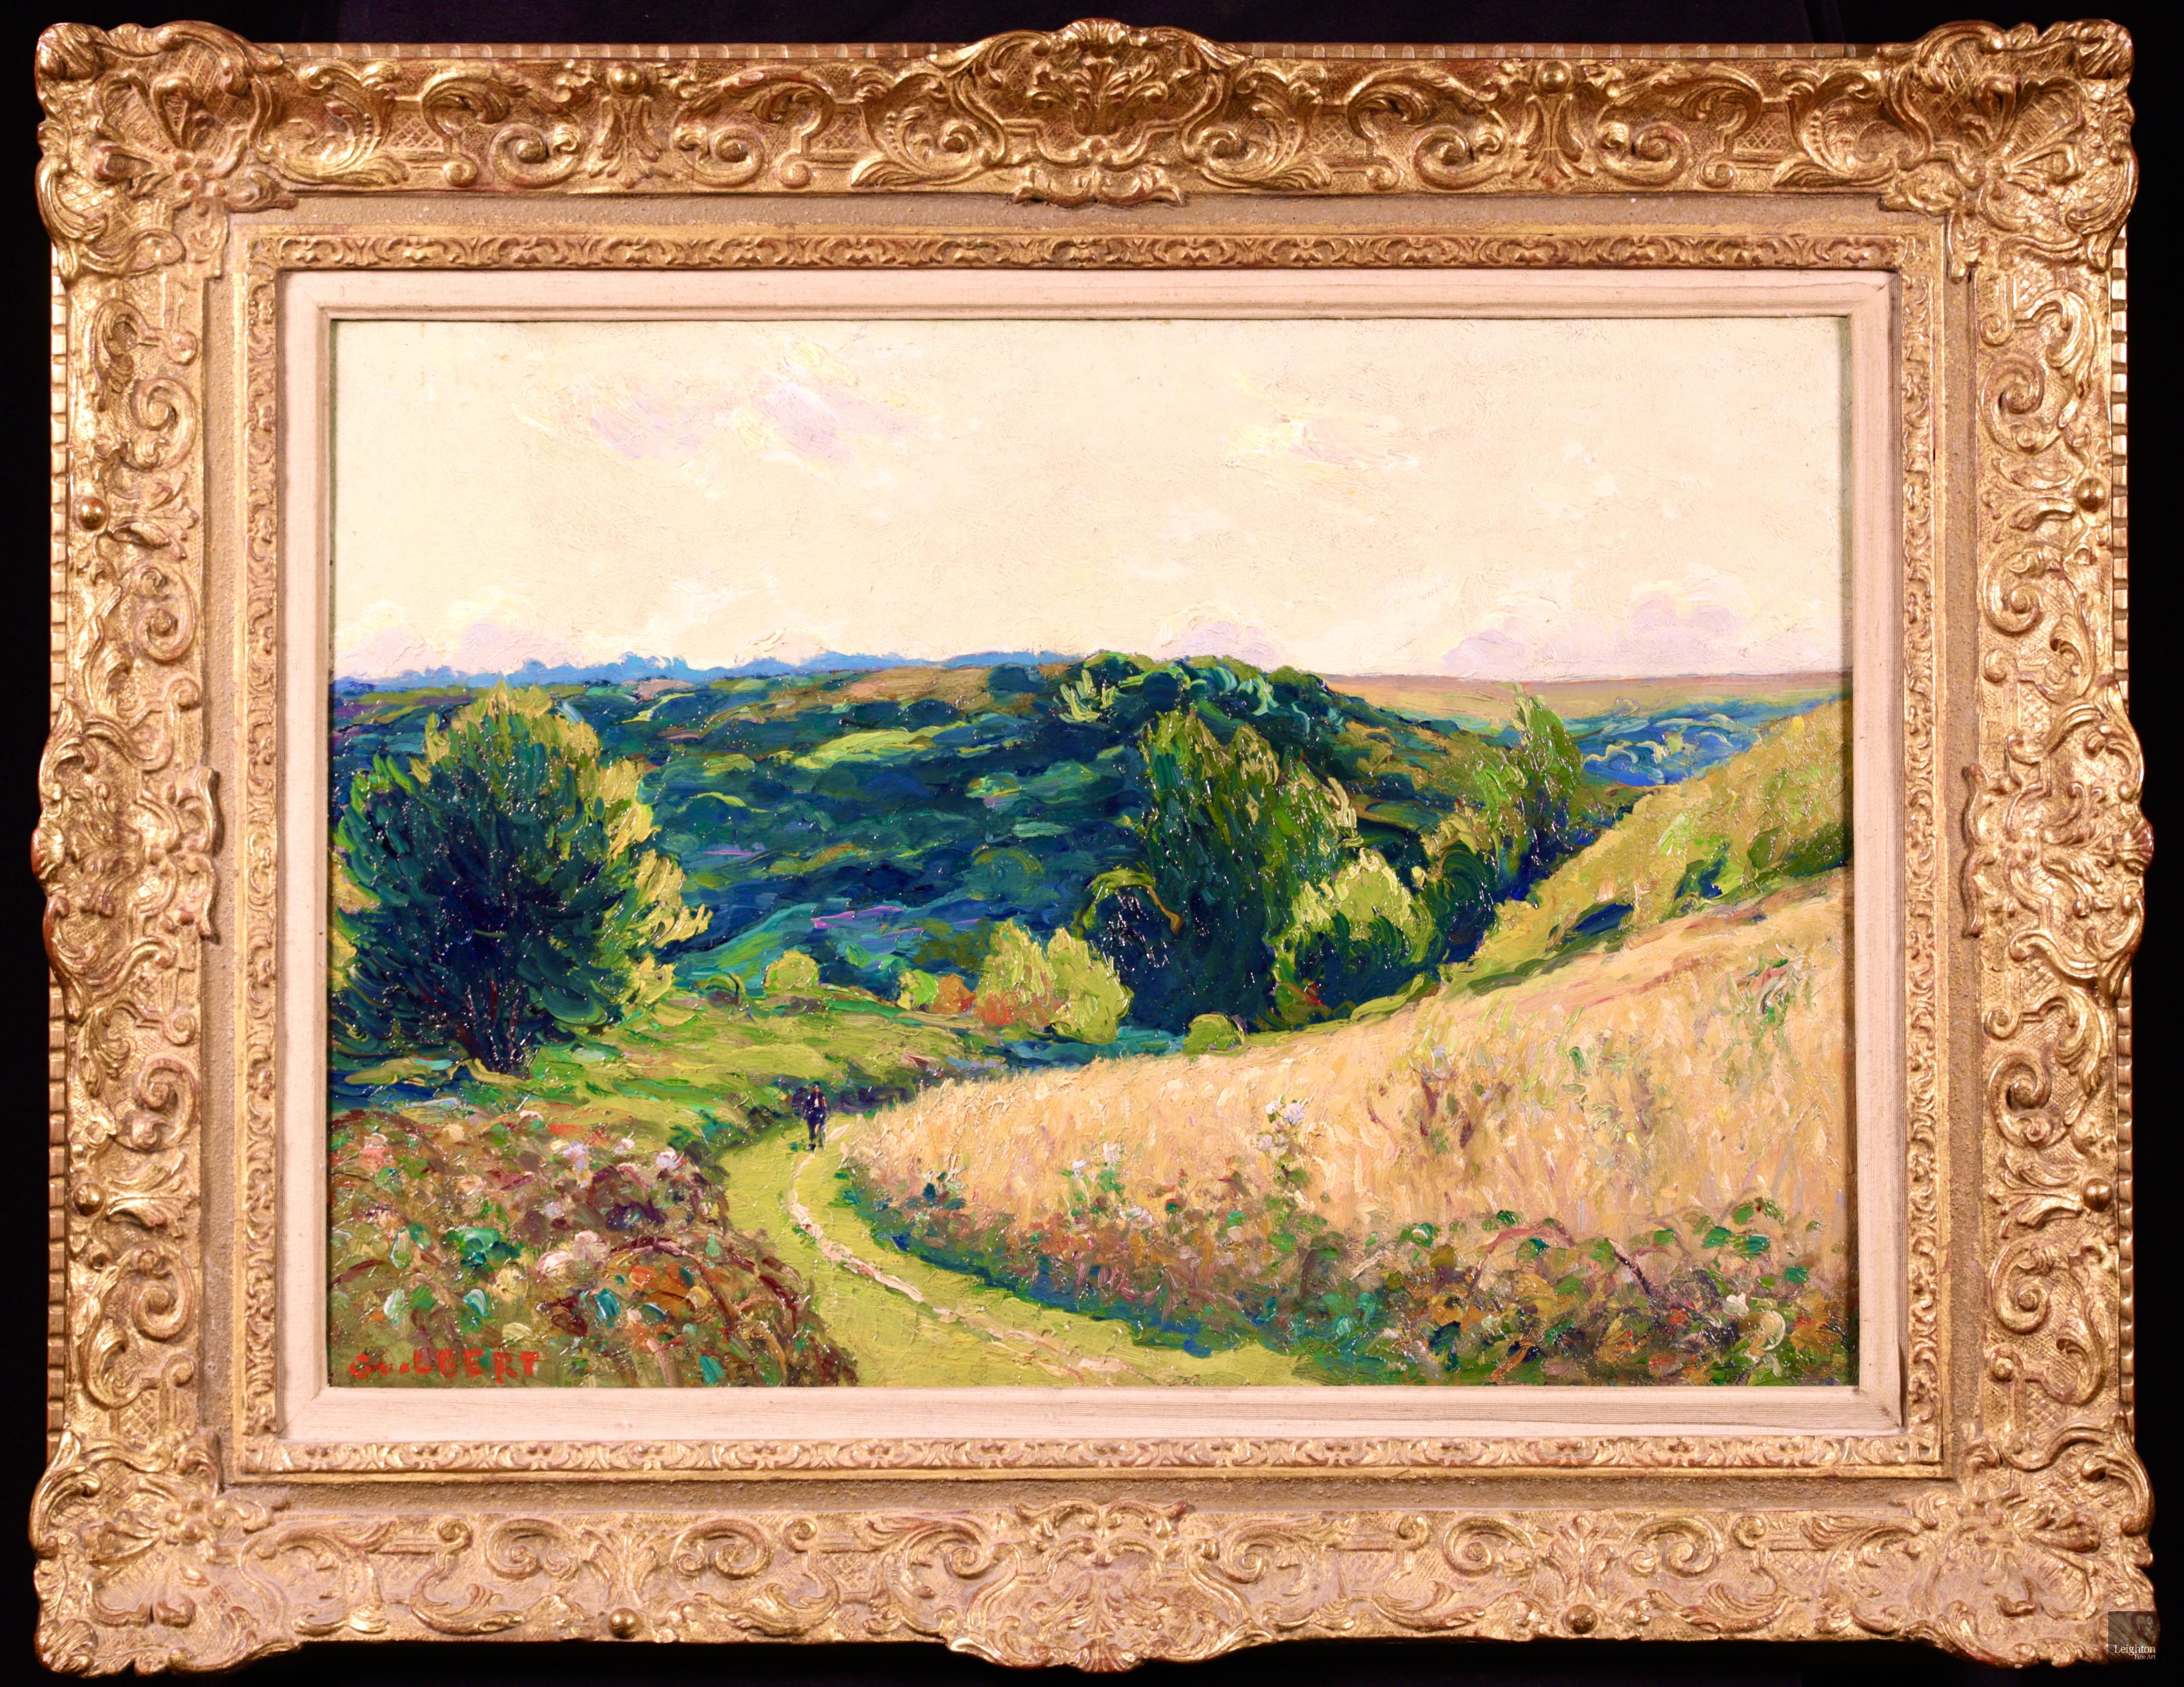 Signed post impressionist figure in landscape oil on canvas circa 1930 by French painter Narcisse Guilbert. The work depicts a lone man walking in the afternoon sun up a grassy path through fields of long grass and vast green trees and bushes in La